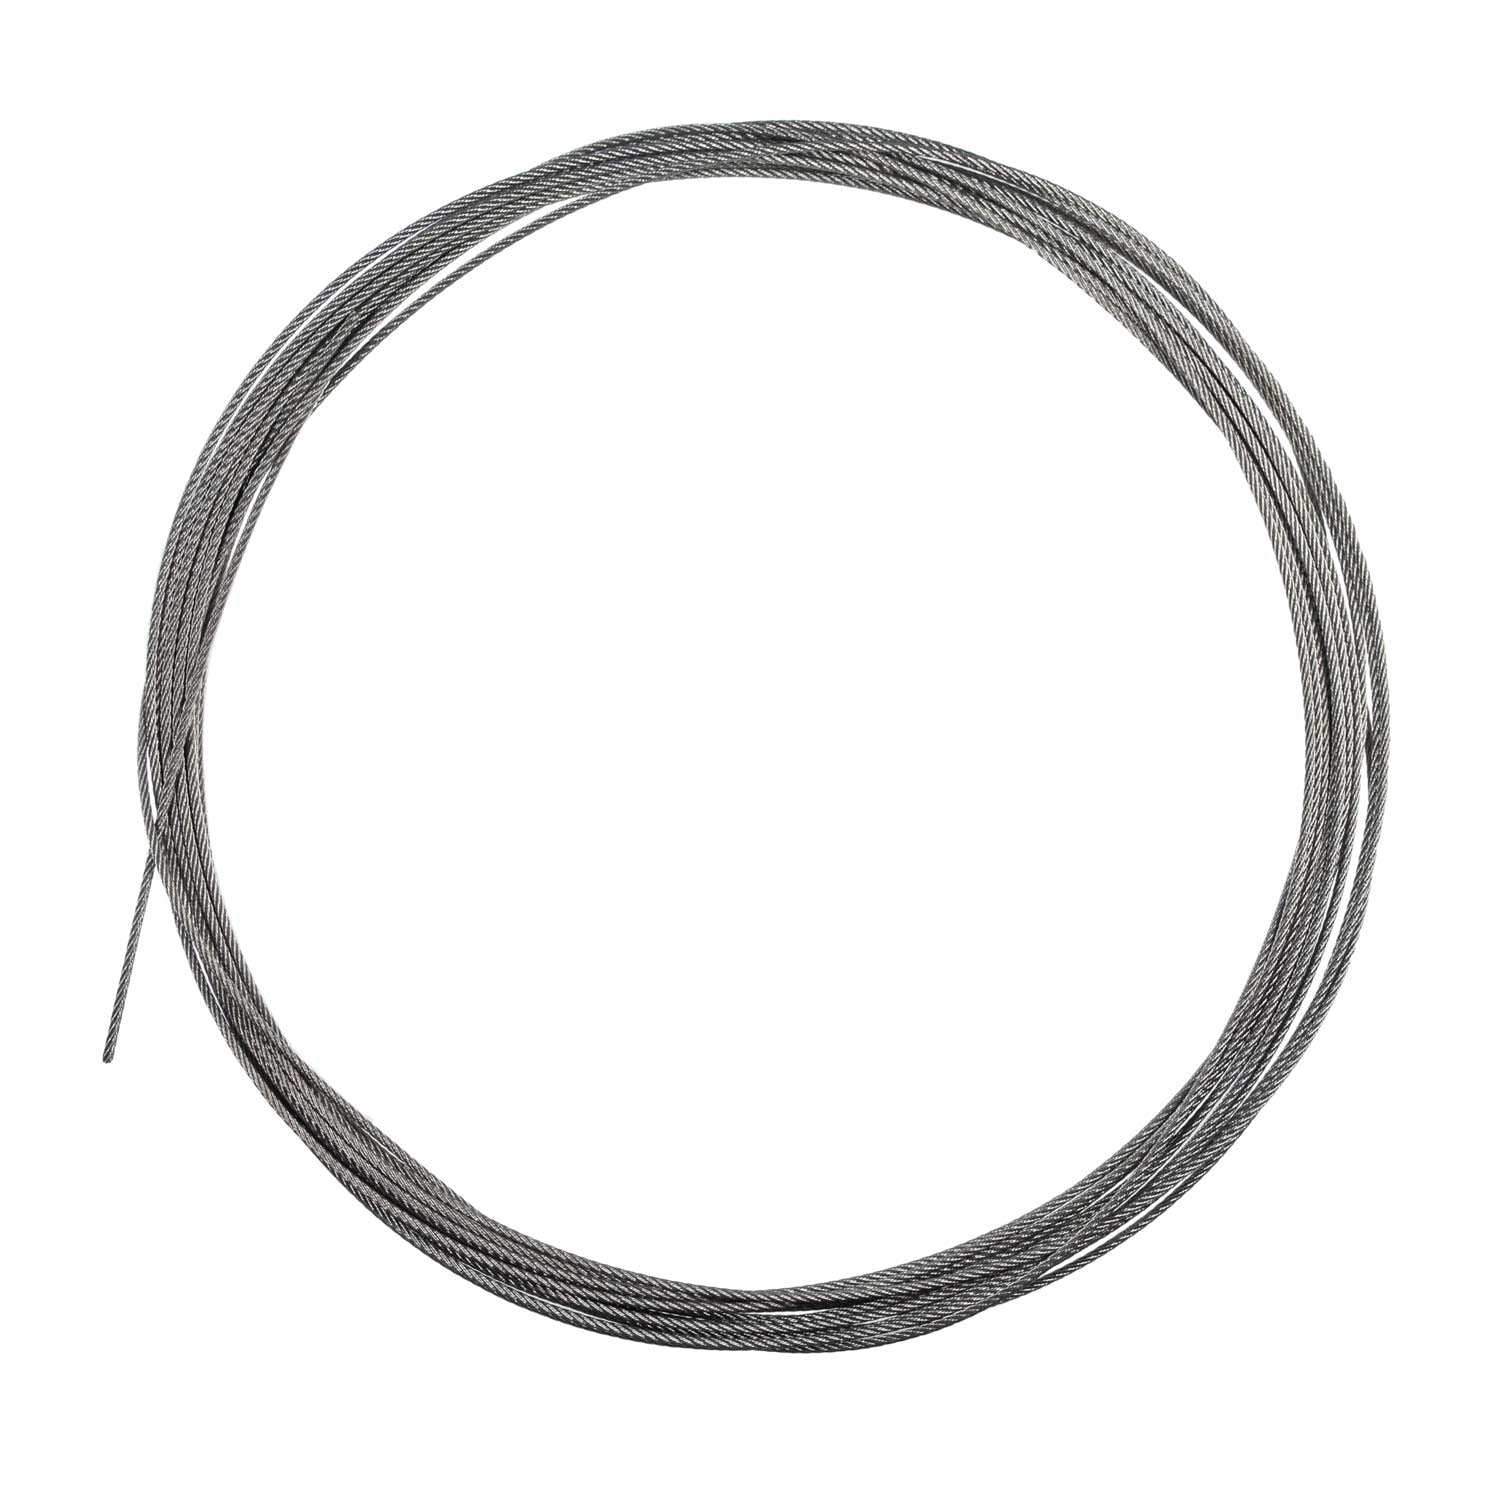 7x7 Fishing Cable (25 ft.) – Rite Angler